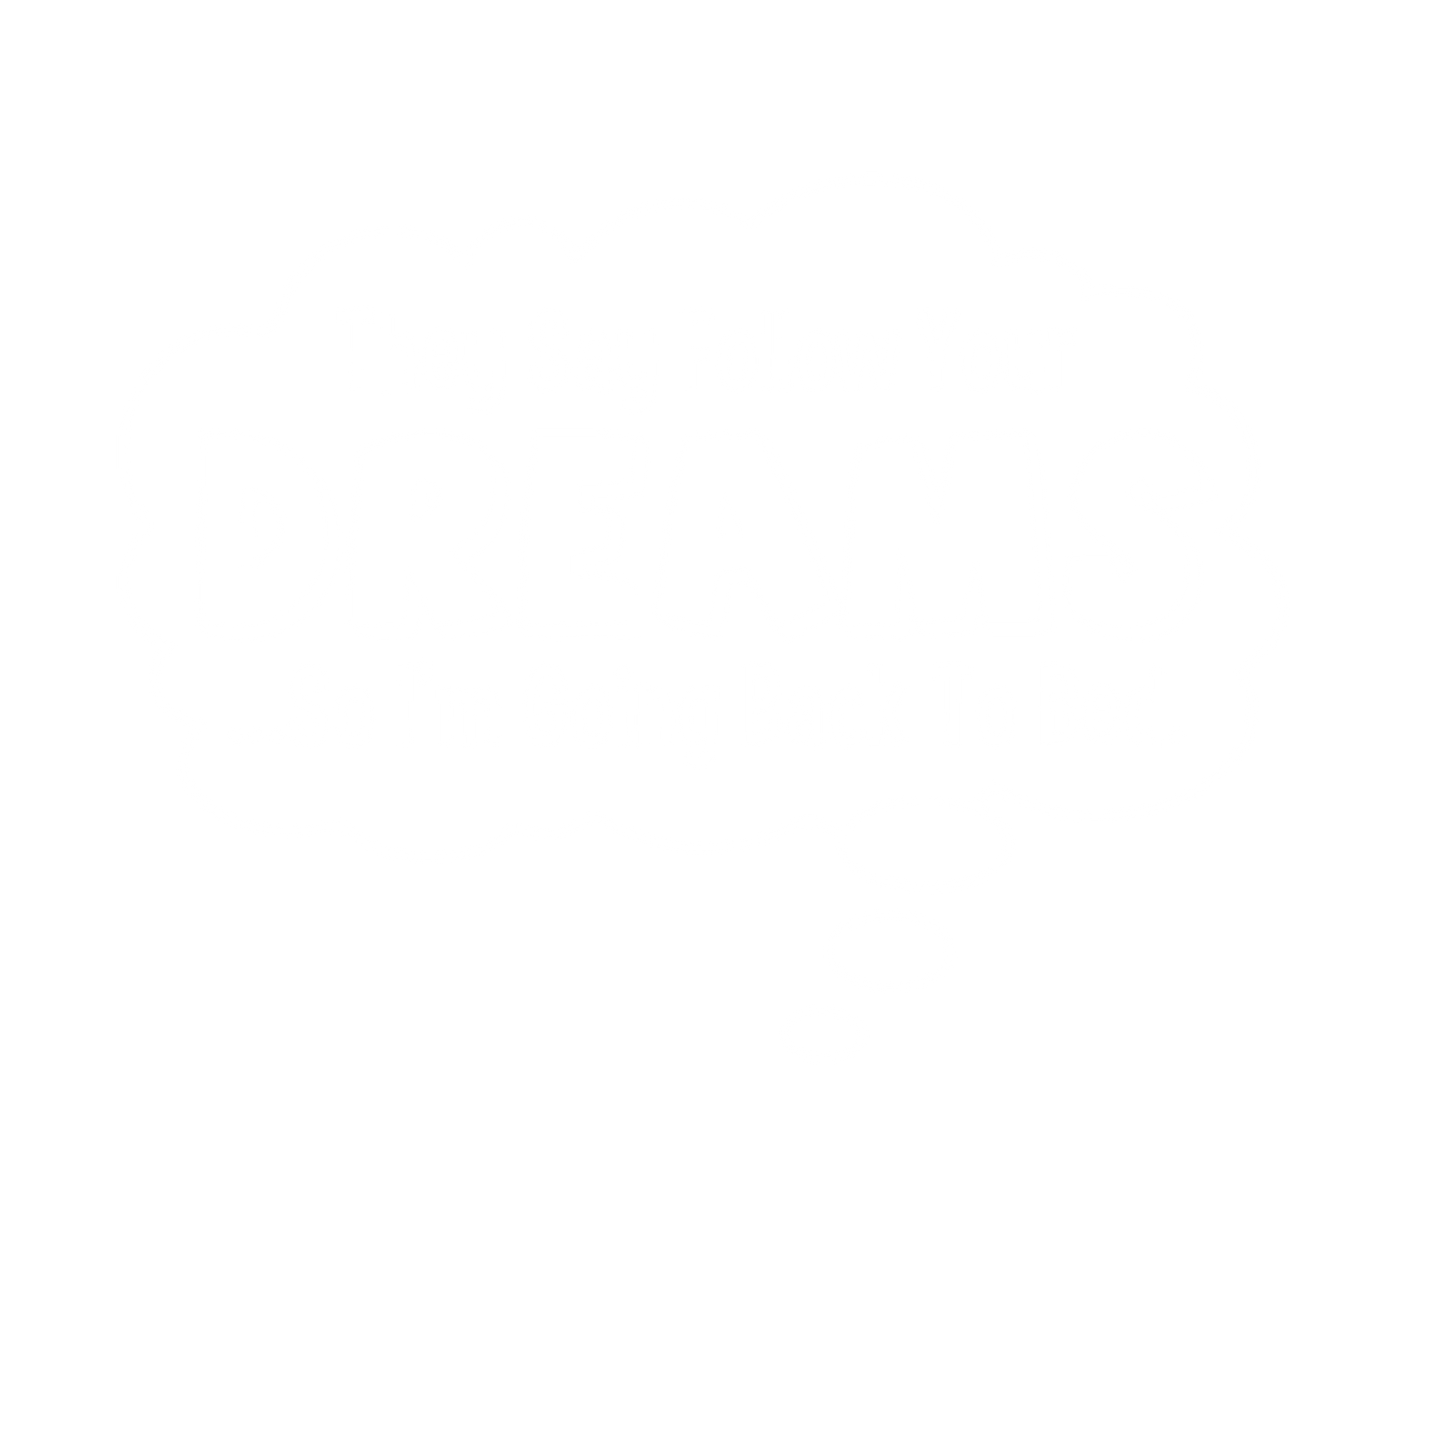 They Say Follow Your Dreams So I'm Going Back To Bed - Roadkill T Shirts